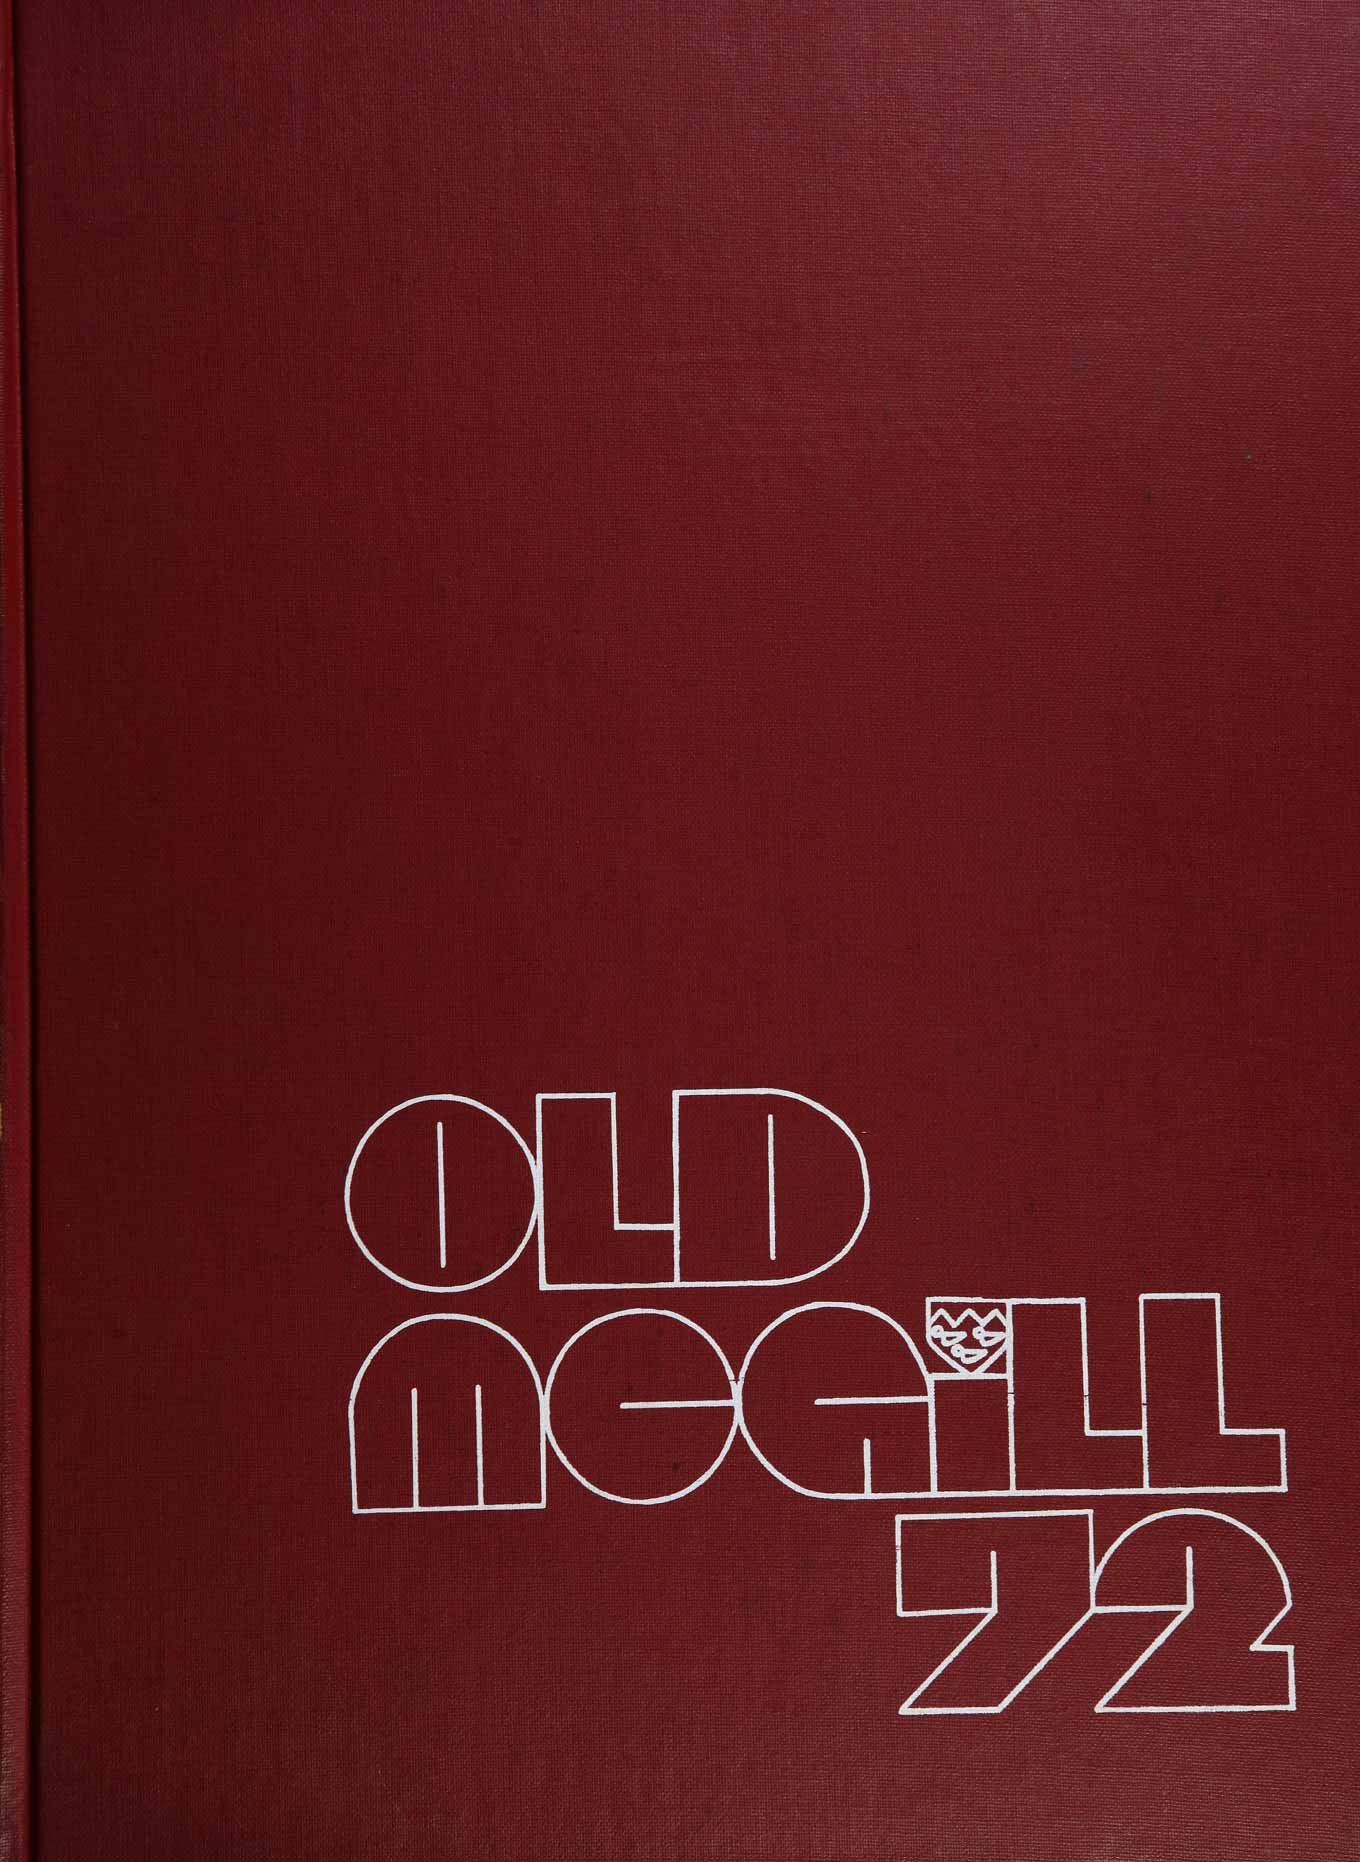 McGill Yearbook: 1972